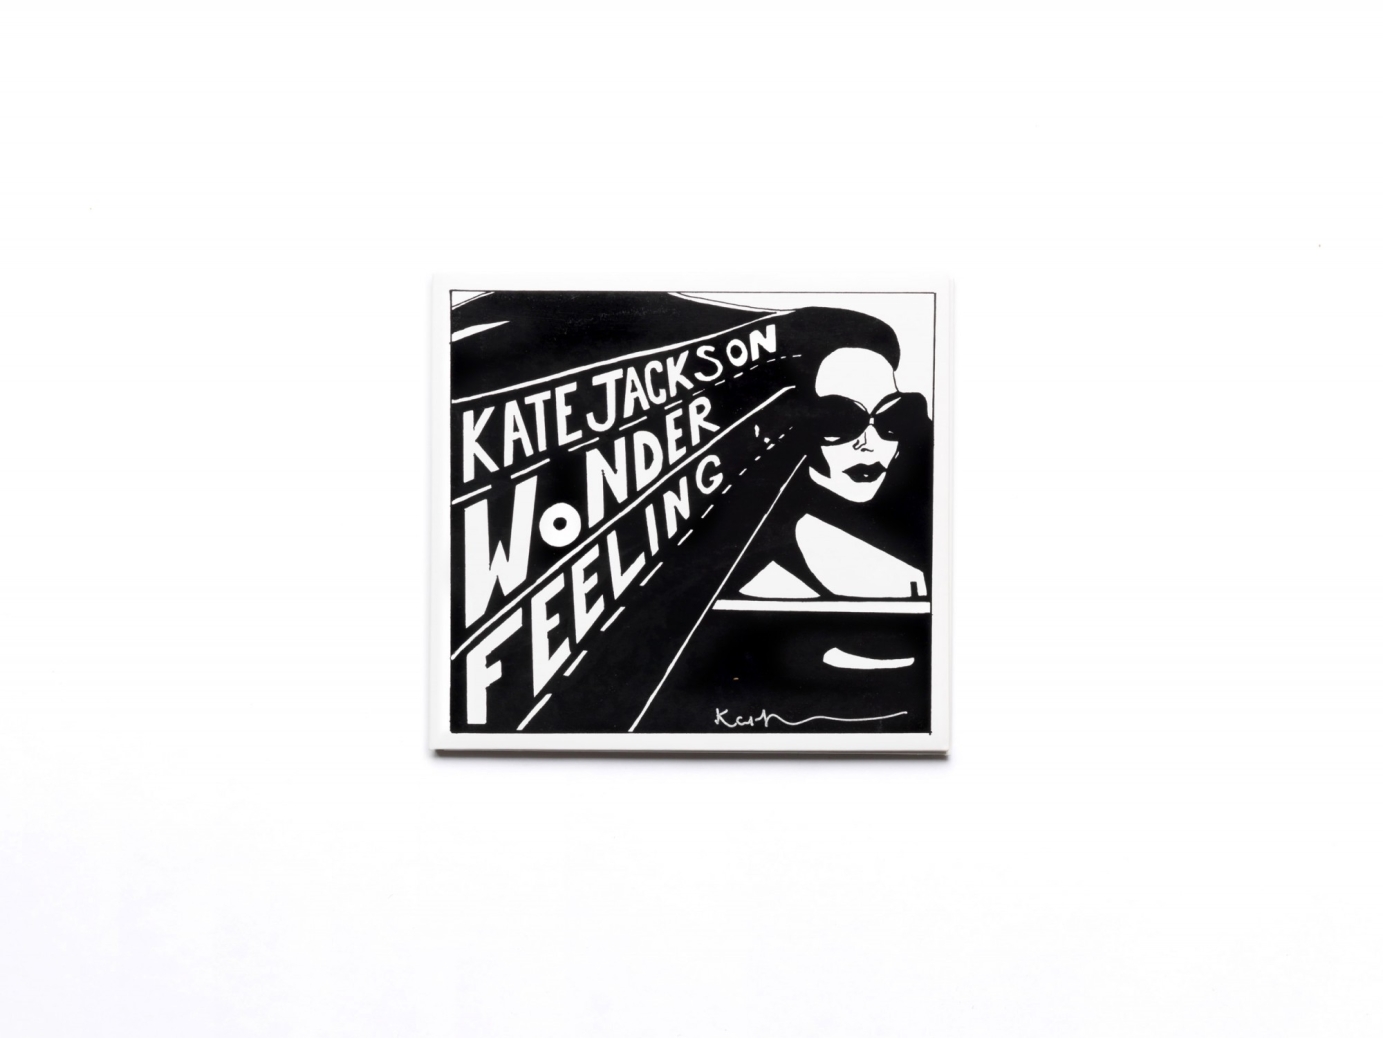 Creative direction and graphic design for Kate Jackson by StudioPensom